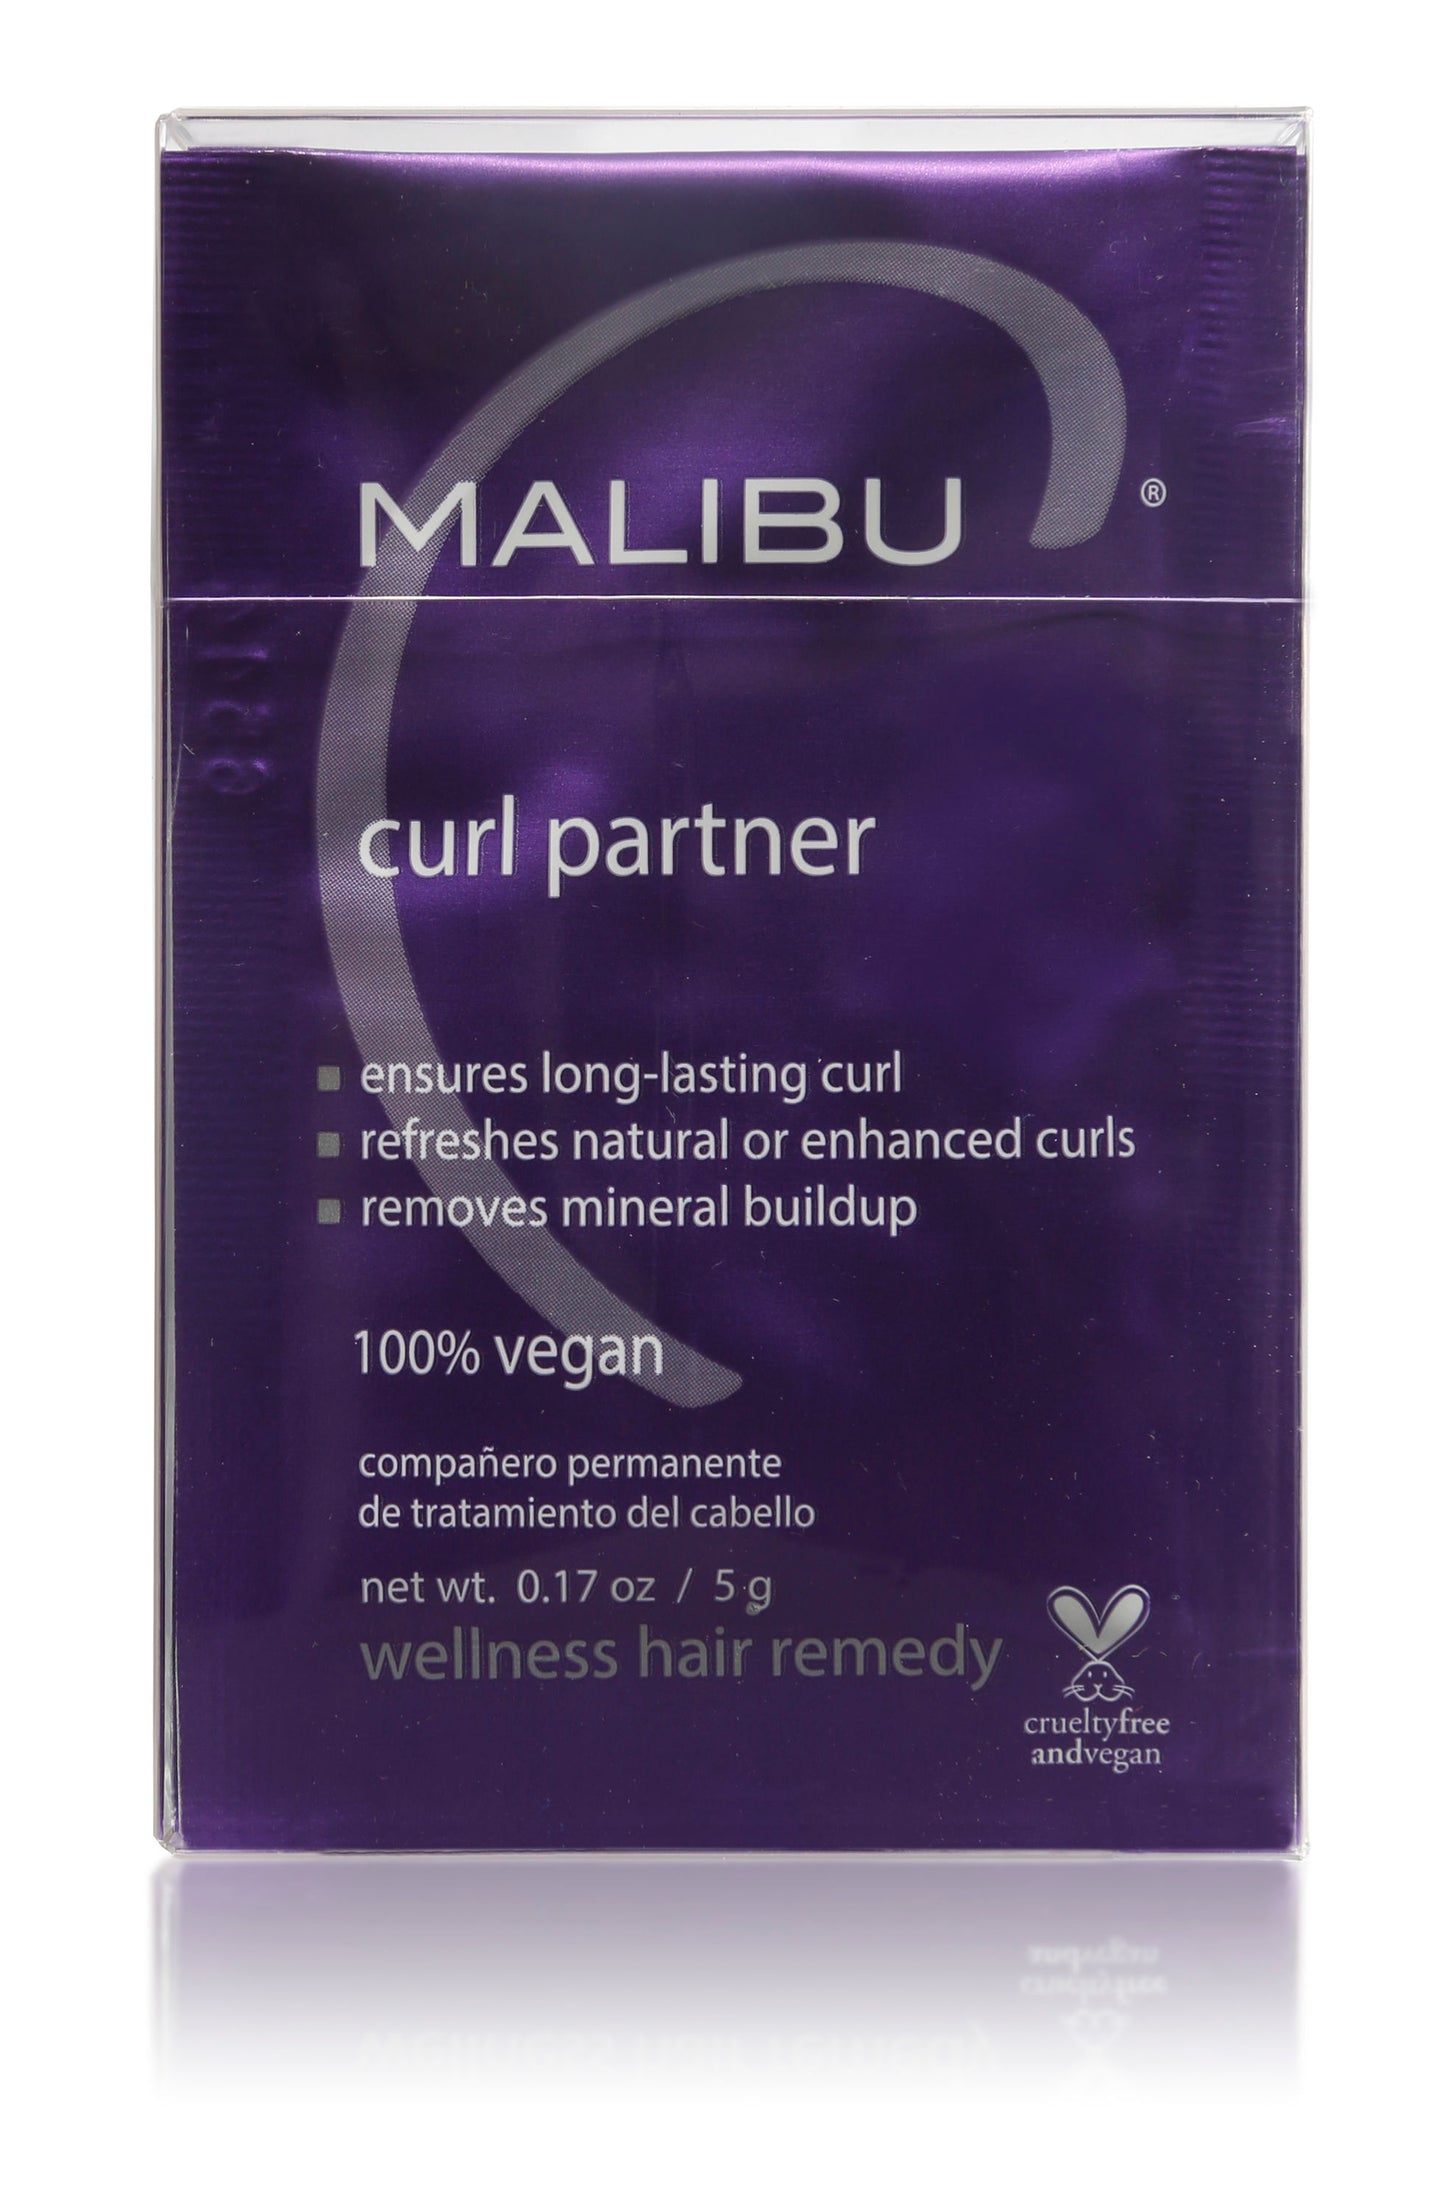 Malibu C Curl Partner Wellness Hair Remedy For Curly Hair Pack of 12